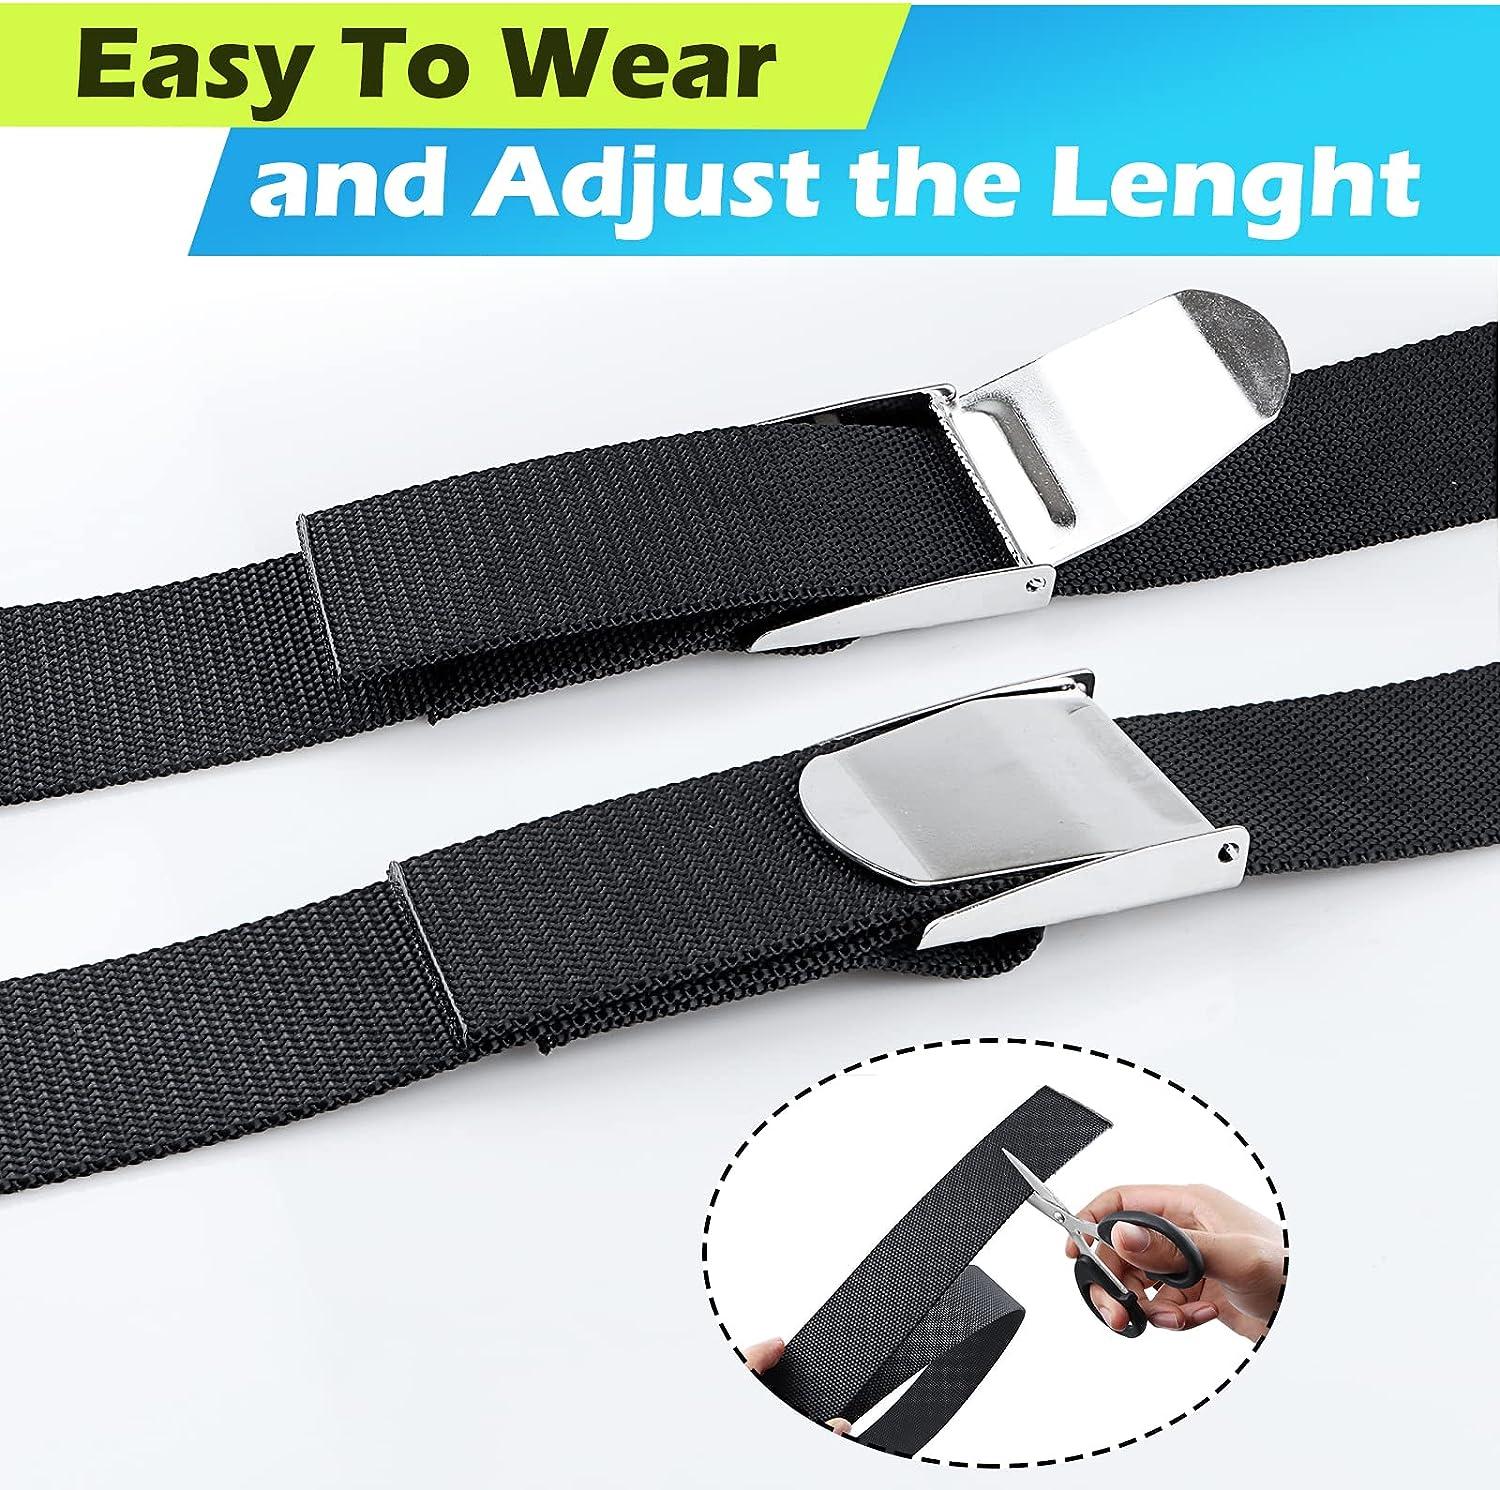 Pluzluce 60 Long Scuba Diving Weight Belt, Adjustable Snorkeling Webbing  Weight Strap Belts with Quick-Release Stainless Steel Buckle for Free  Diving, Spear Fishing Black